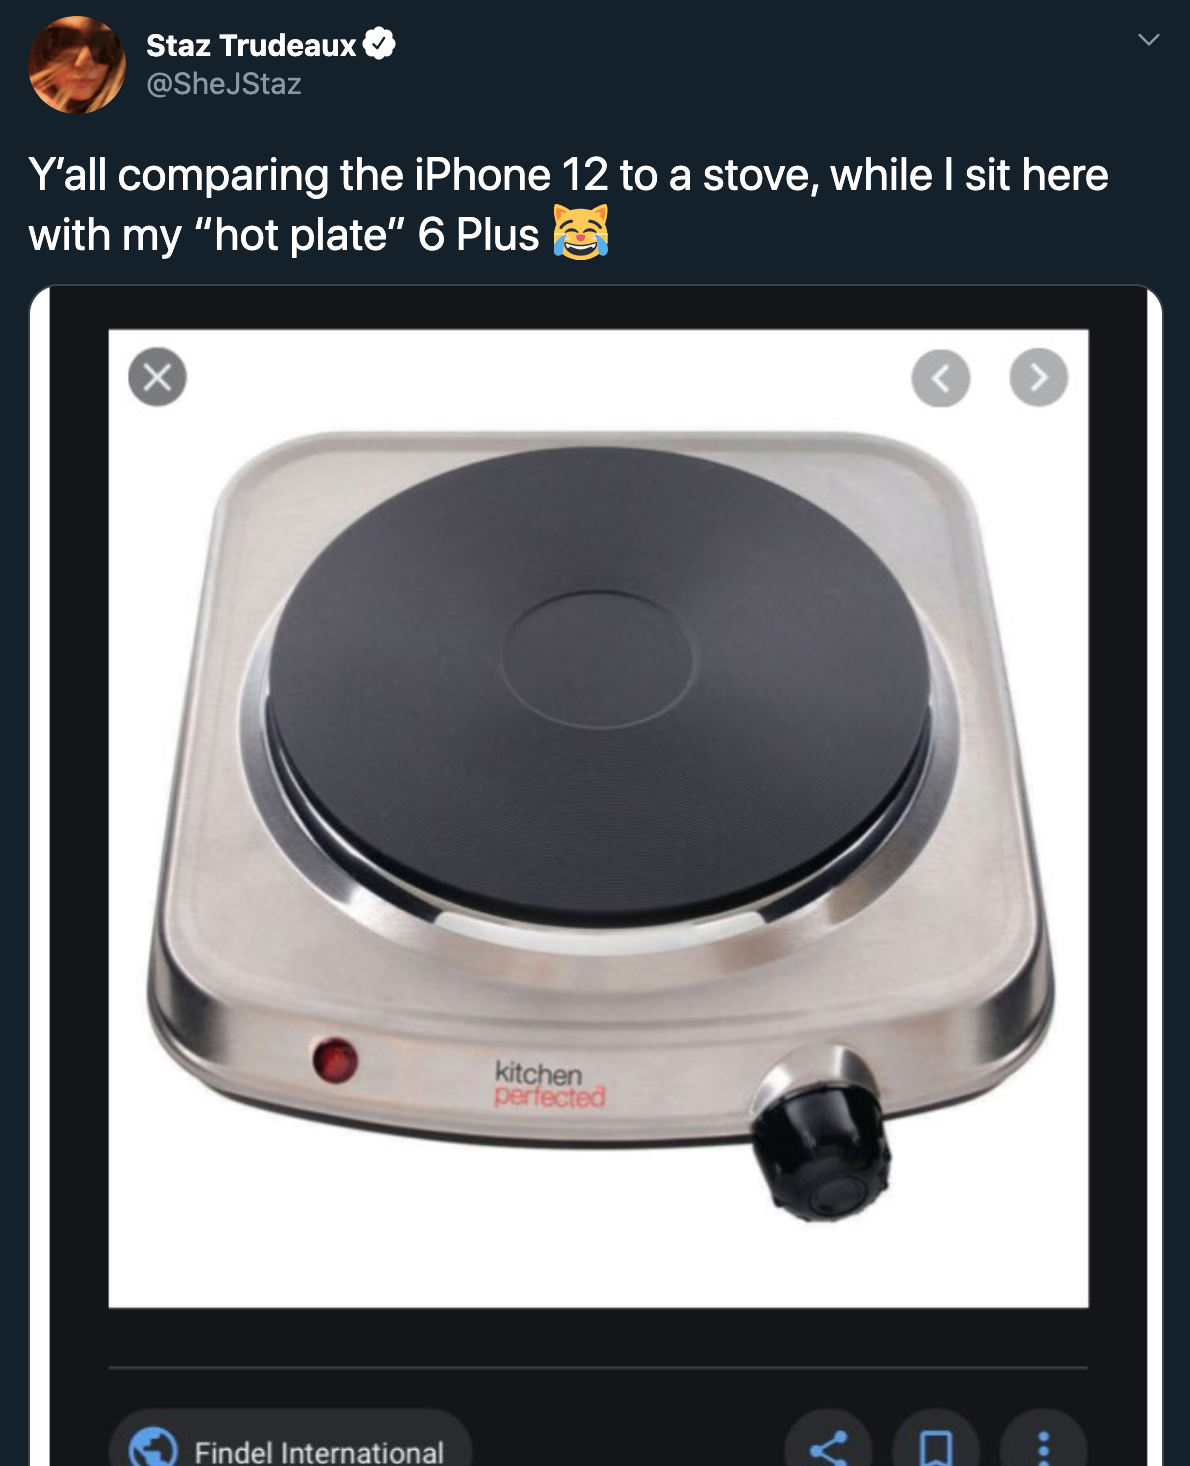 Y'all comparing the iPhone 12 to a stove, while I sit here with my hot plate 6 plus